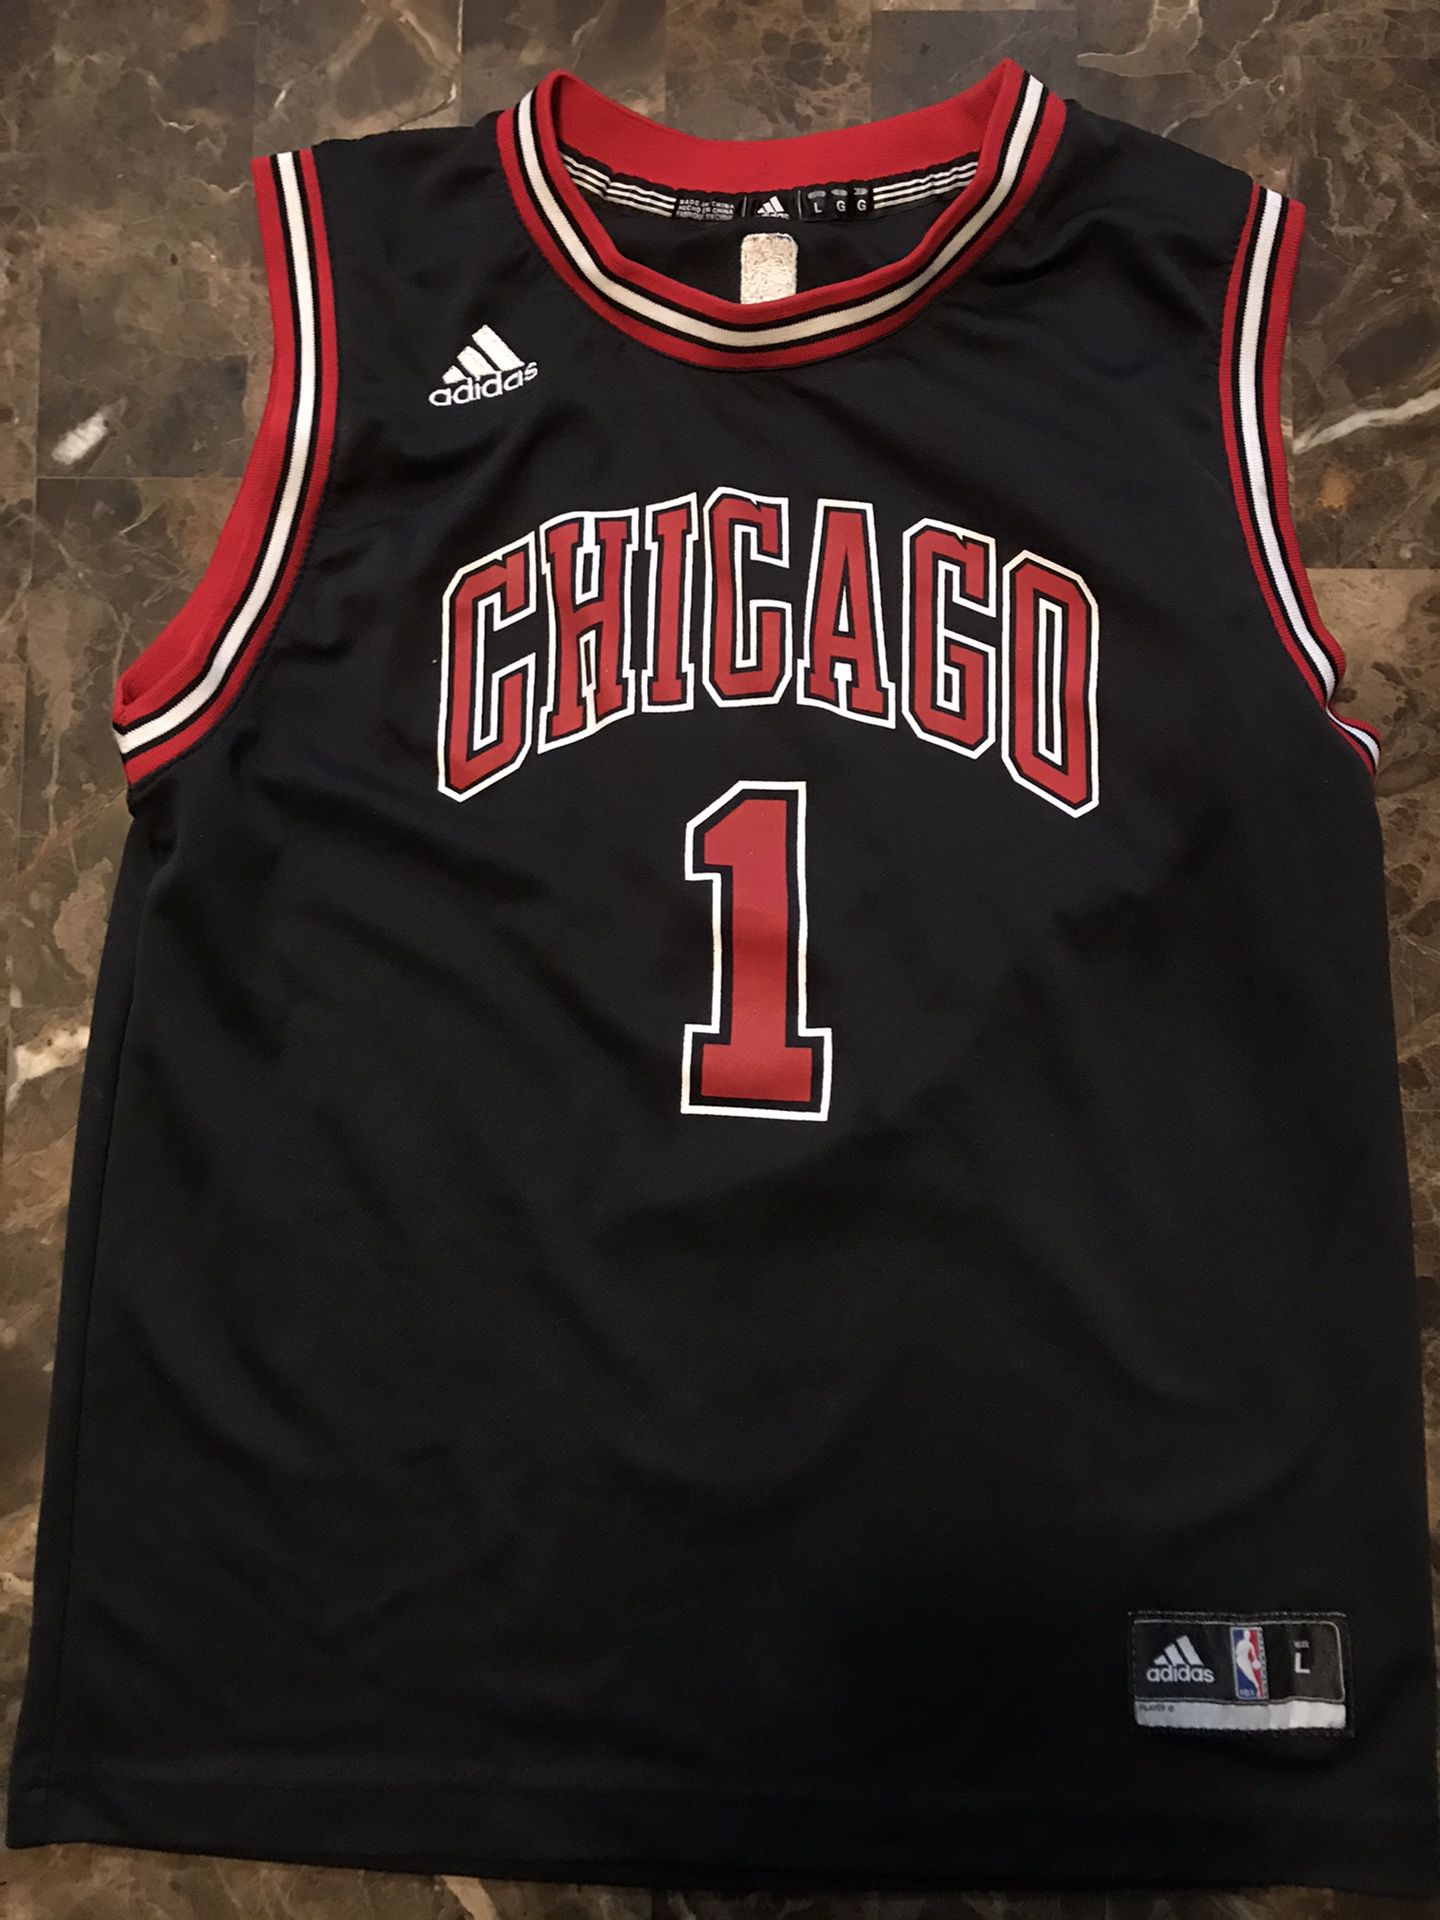 Adidas Hardwood Classic NBA Chicago Bulls Derrick Rose Jersey YOUTH MEDIUM.  for Sale in San Leandro, CA - OfferUp